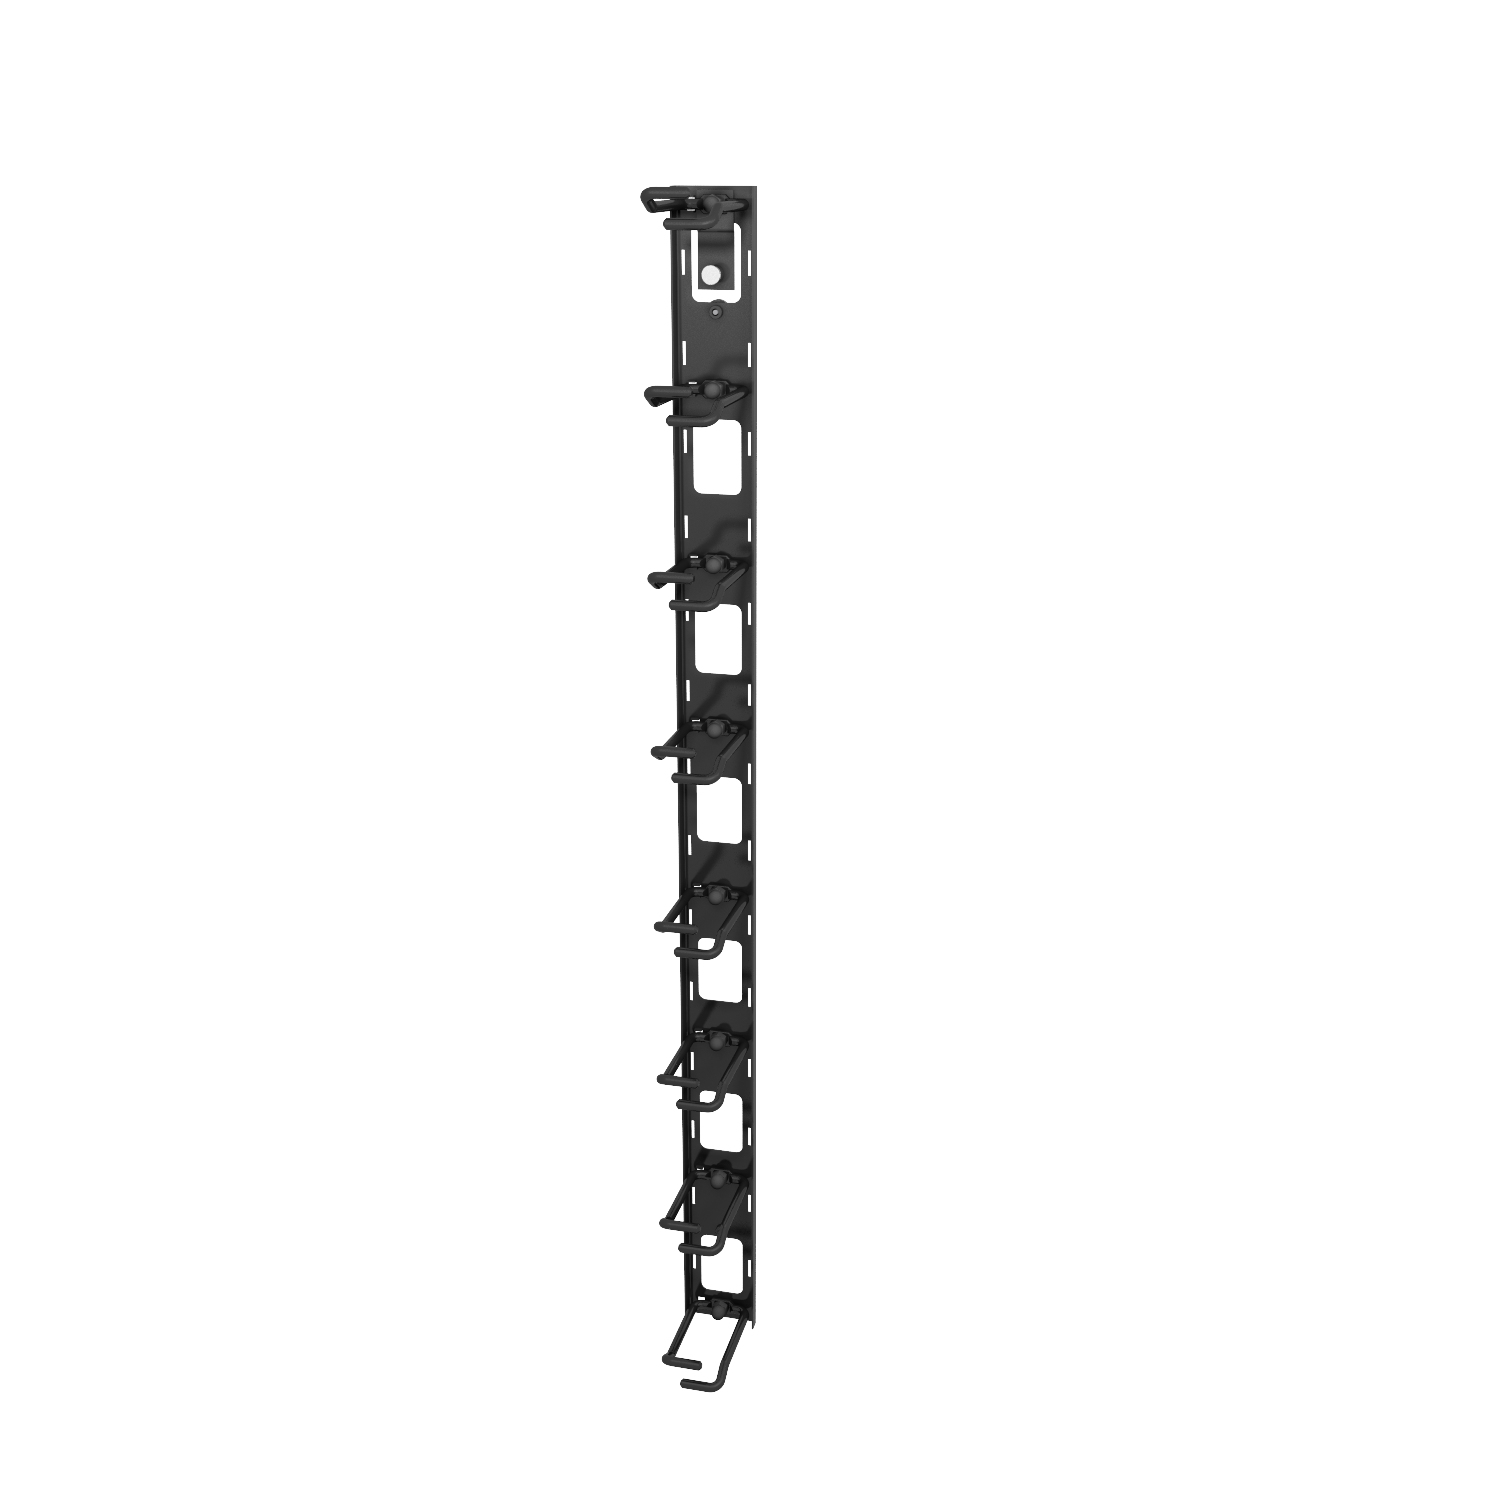 Vertiv VRA1021 Vertical Cable Organizer, 8 Cable Rings